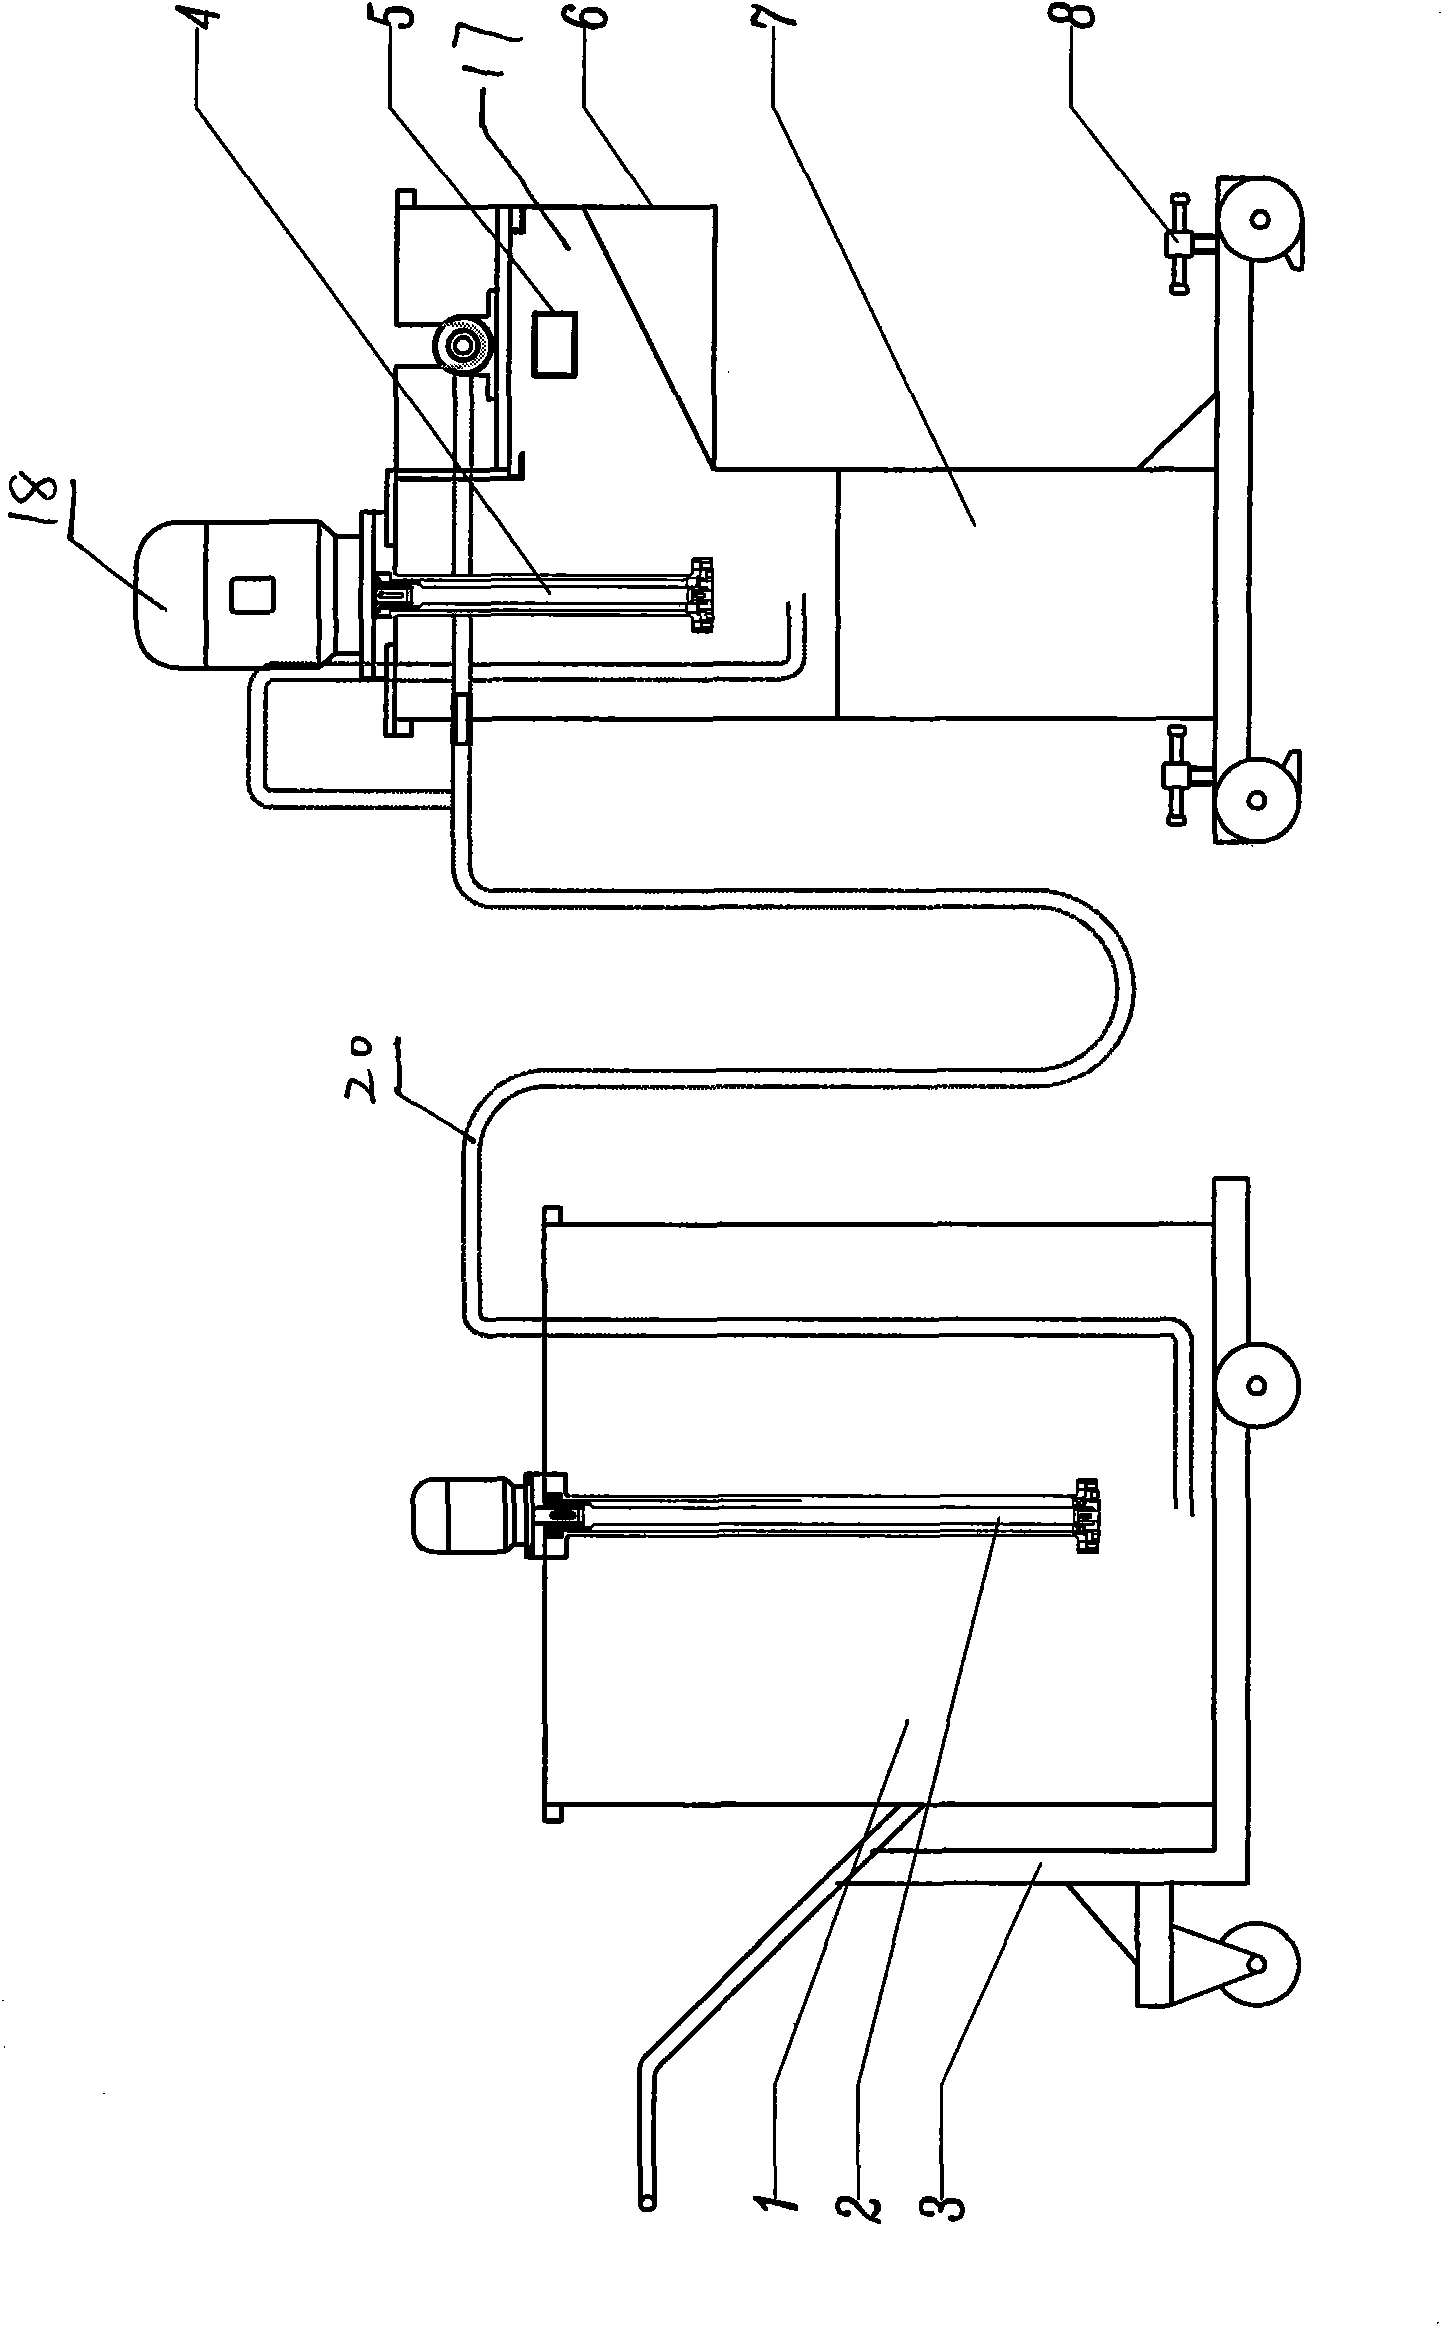 Device for filling water repellent cable paste into communication optical cable